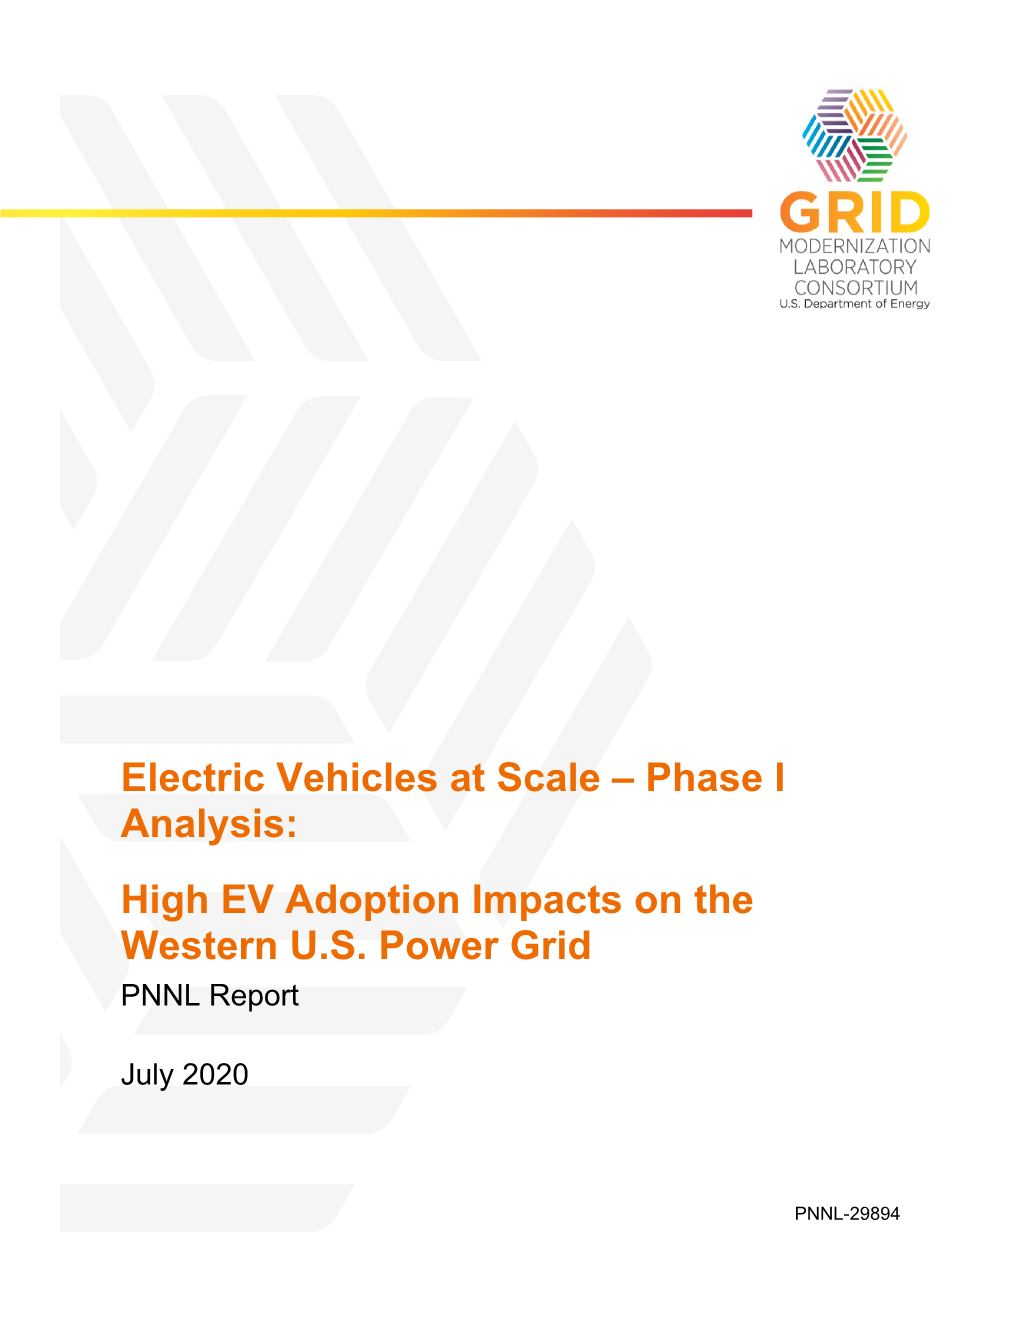 Electric Vehicles at Scale – Phase I Analysis: High EV Adoption Impacts on the Western U.S